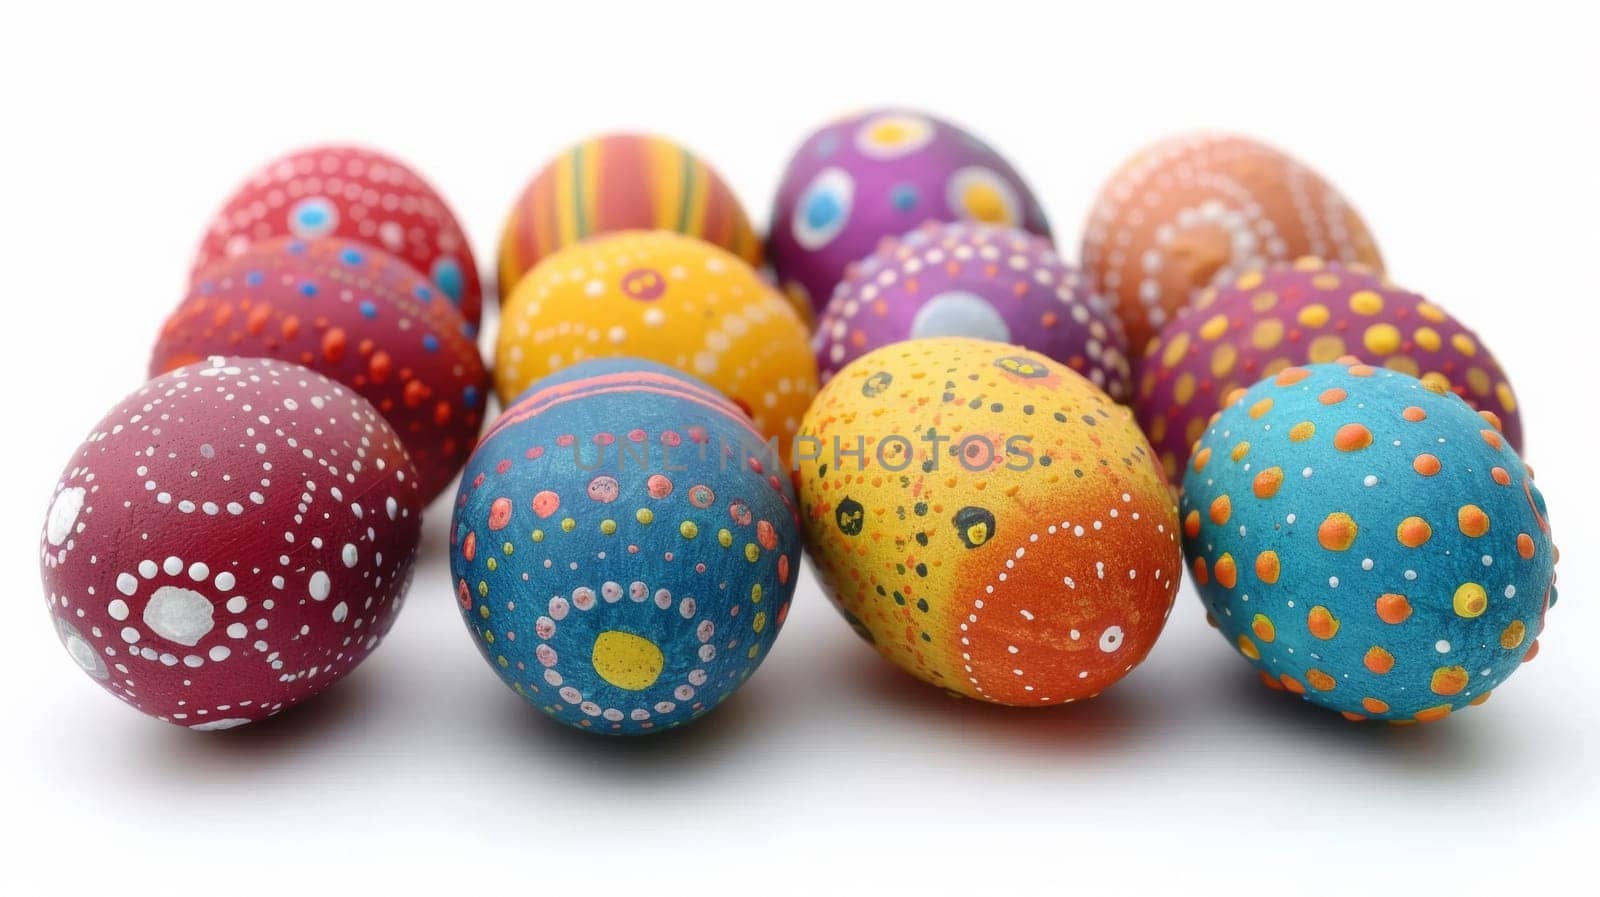 A group of brightly colored eggs with dots and polka-dots, AI by starush